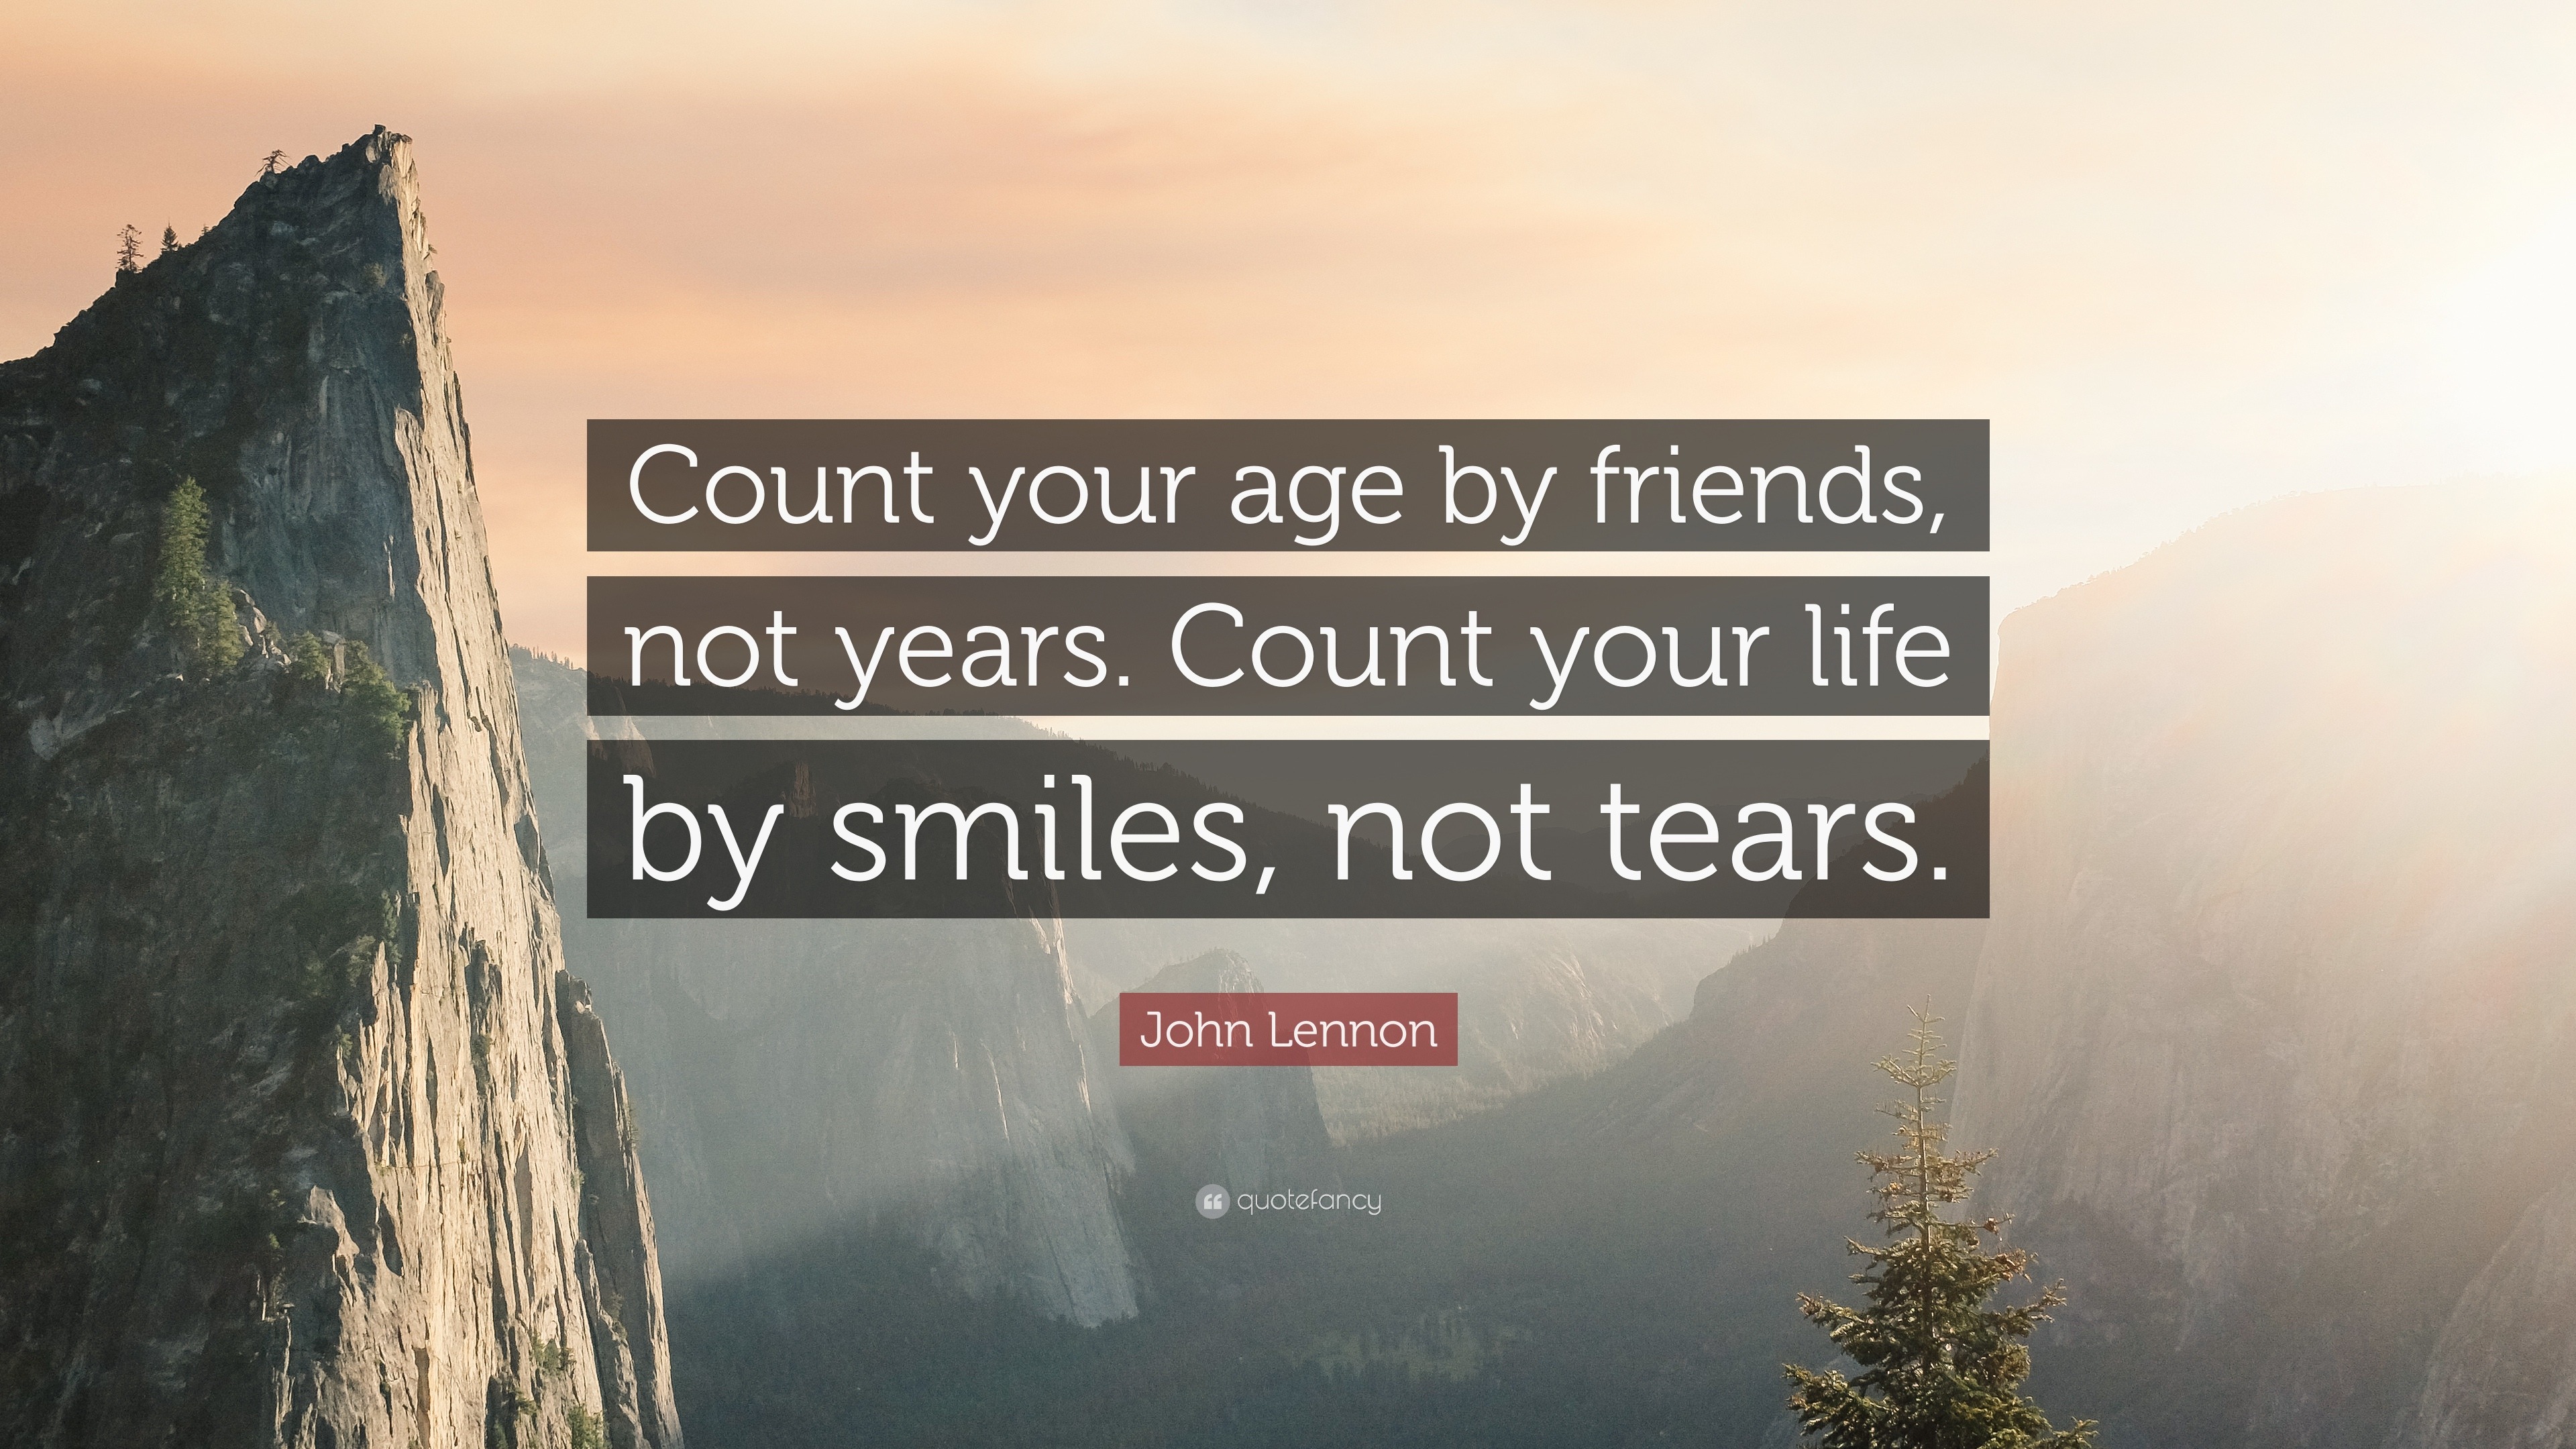 John Lennon Quote “count Your Age By Friends Not Years Count Your Life By Smiles Not Tears” 